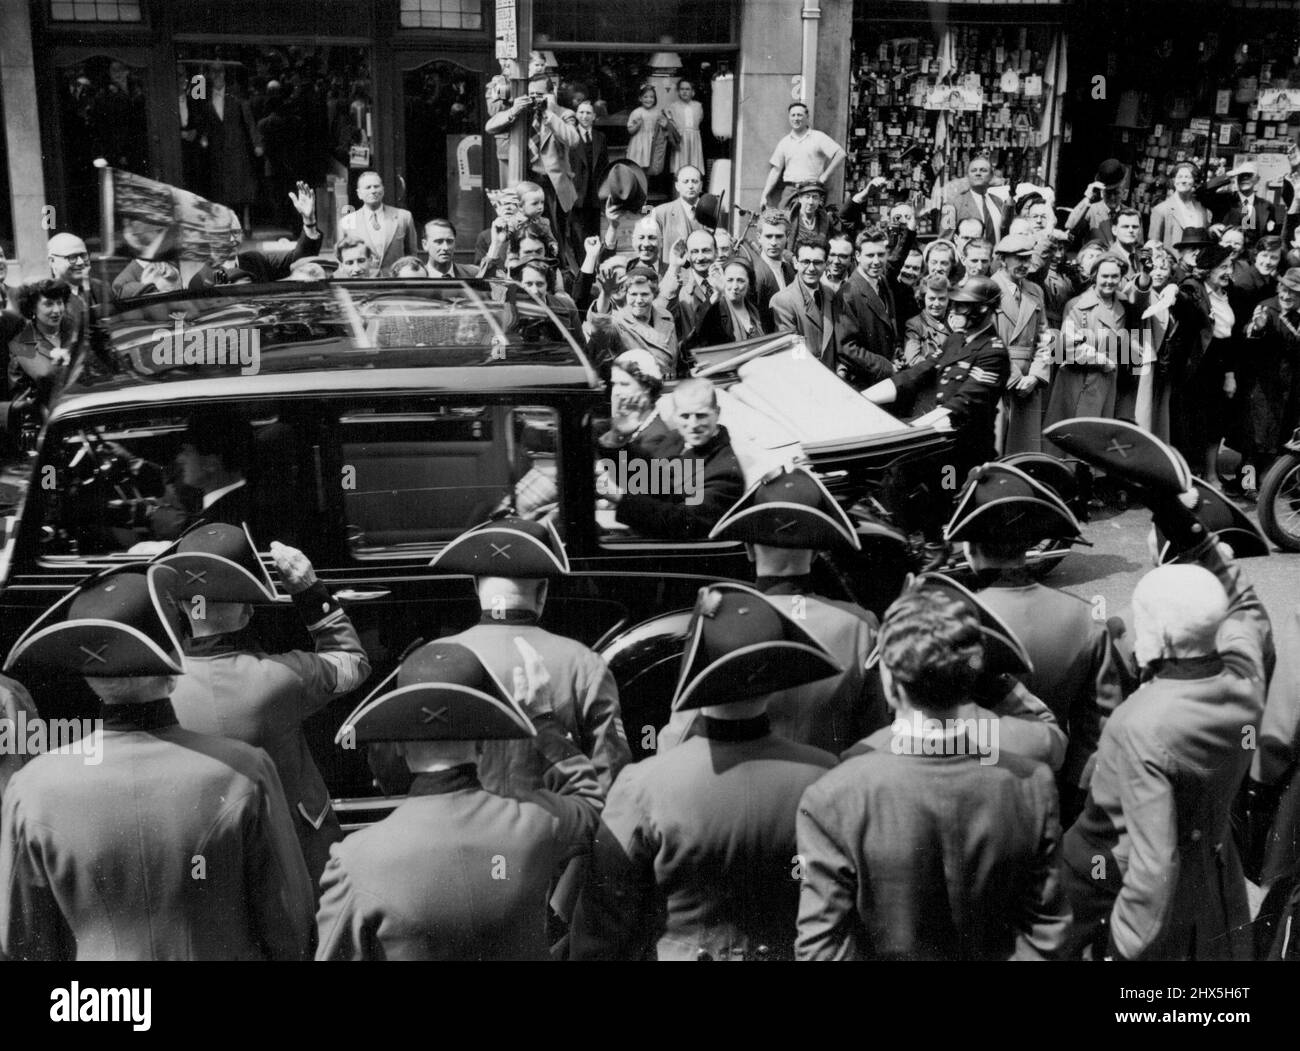 Pensioners See Their Queen. Chelsea Pensioners from the Royal, Hospital look on as the Queen and the Duke of Edinburgh are driven along King's Road, Chelsea, during the second of their Coronation week drives through the streets of London. June 2, 1953. Stock Photo